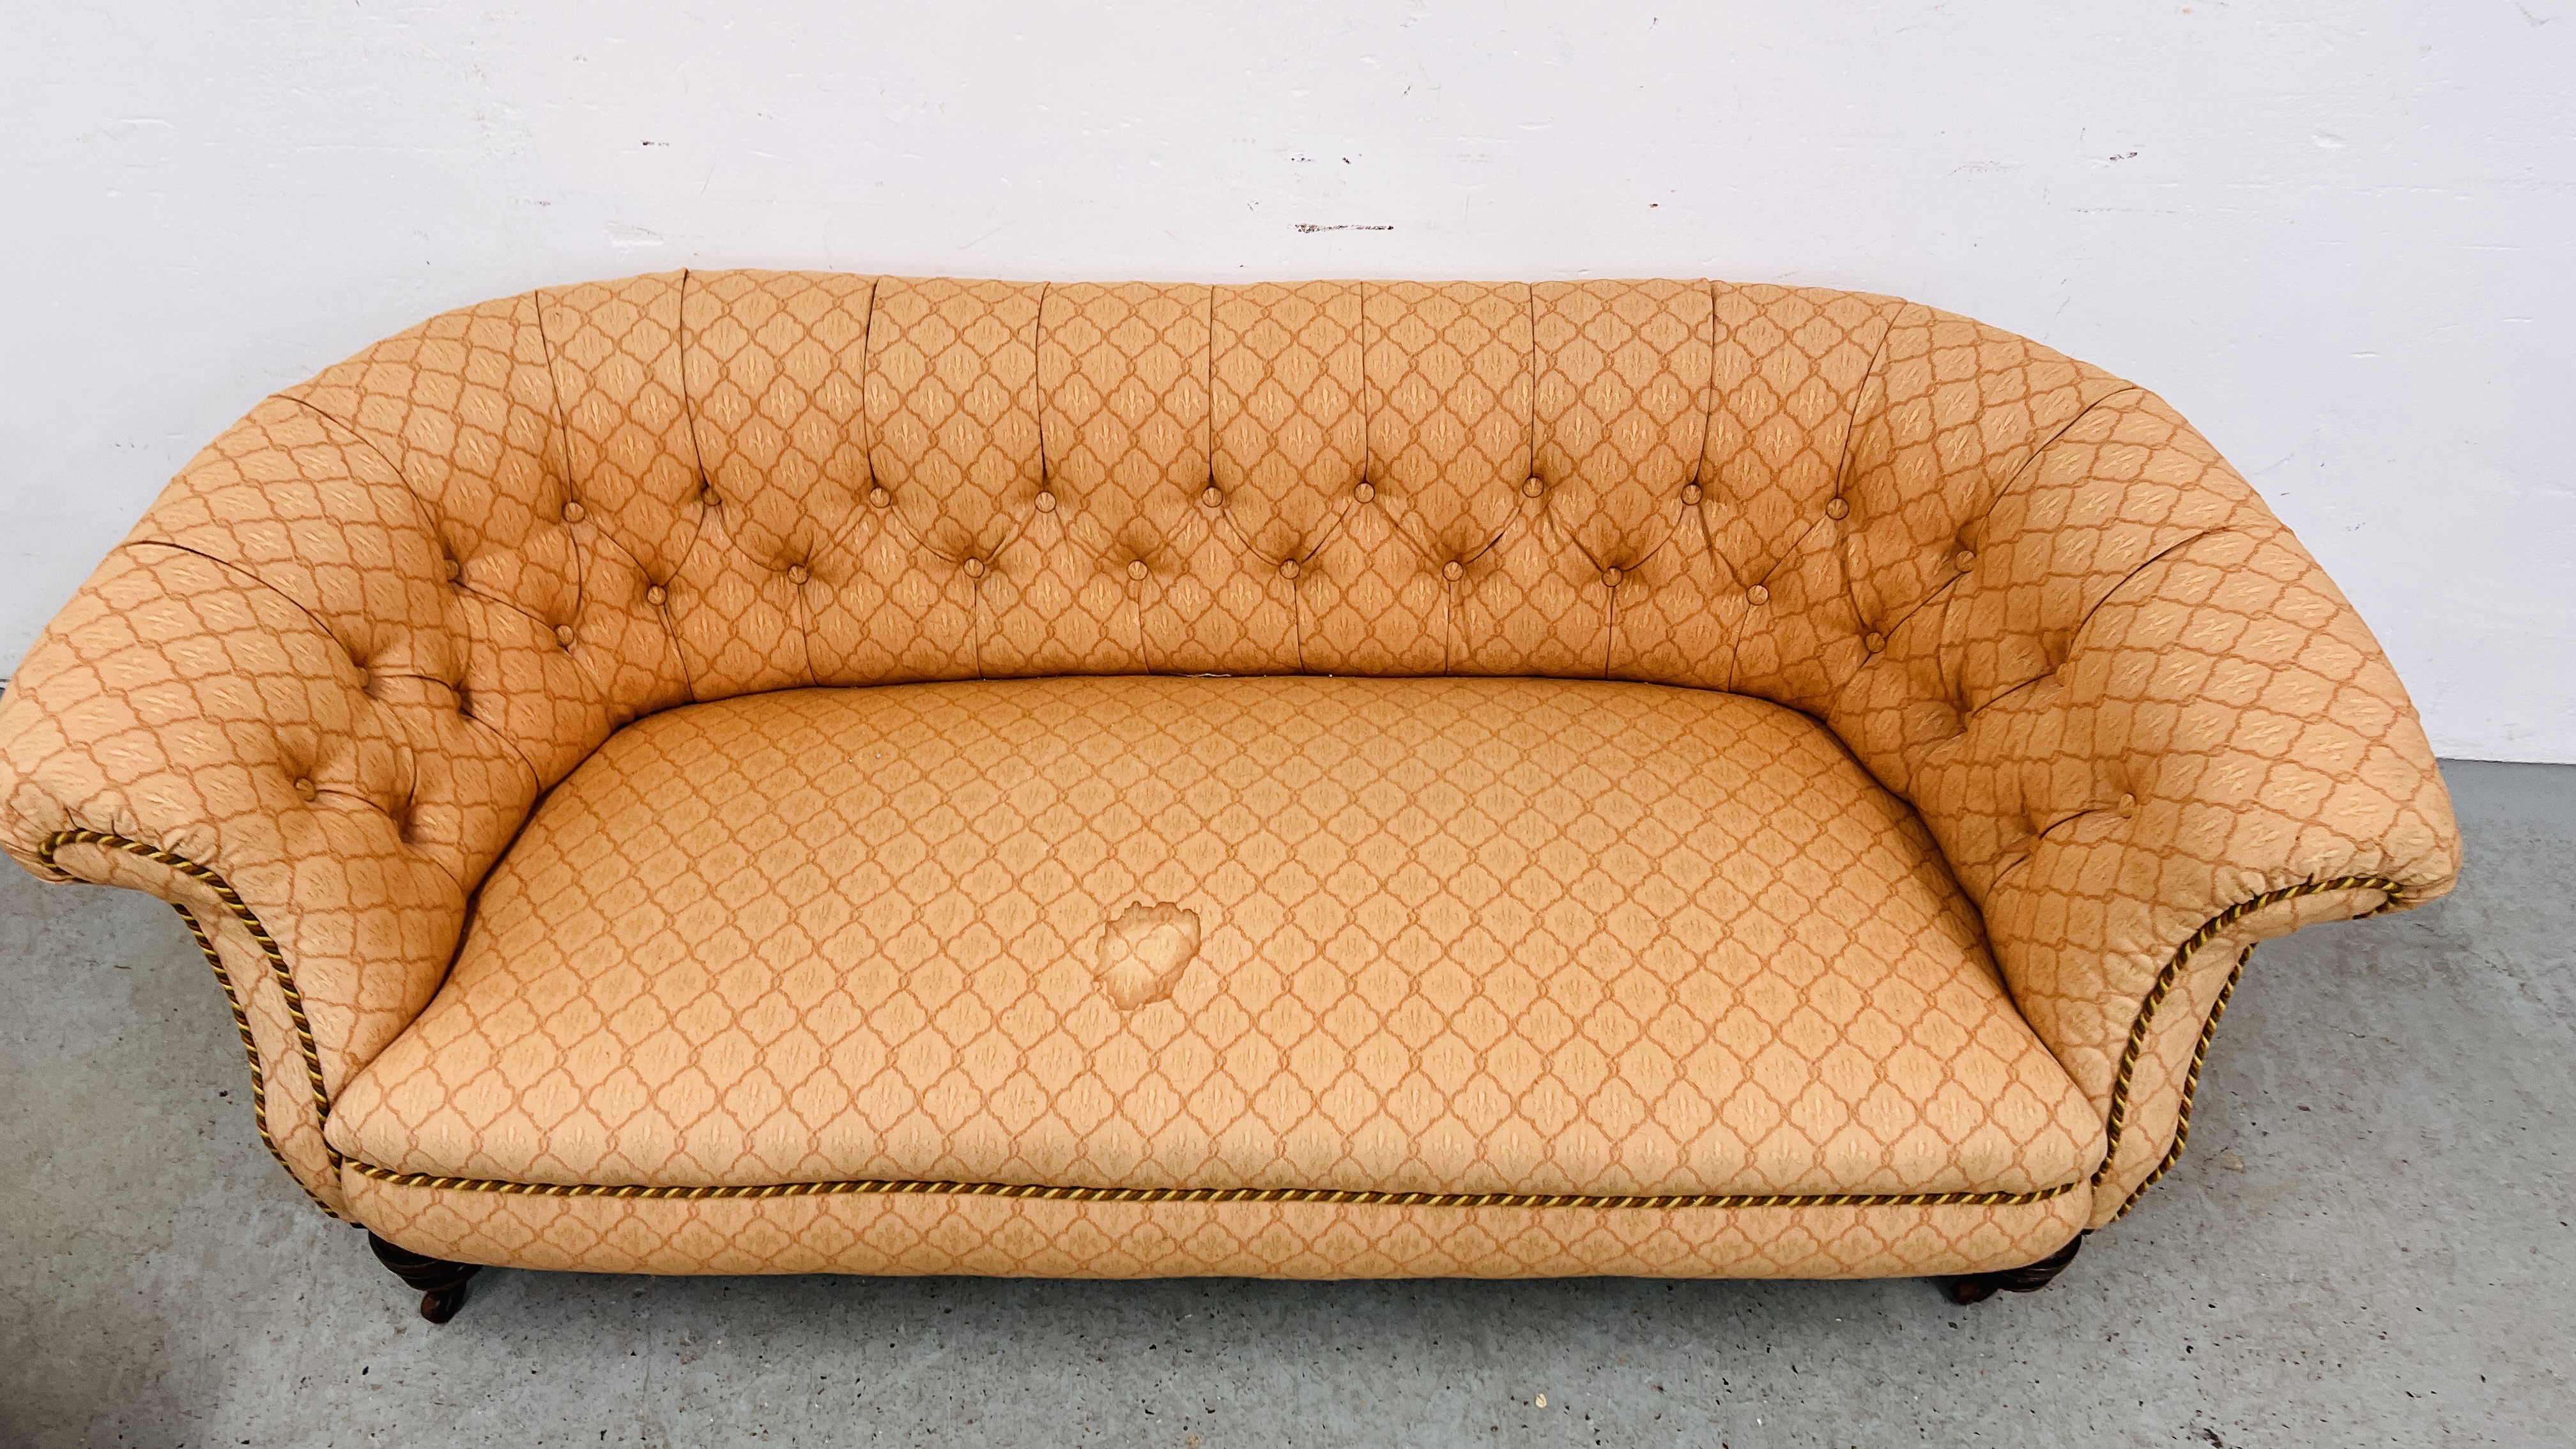 A VICTORIAN BUTTON BACK SOFA AND A LADY'S ARMCHAIR COVERED IN A SIMILAR FABRIC. - Image 4 of 11